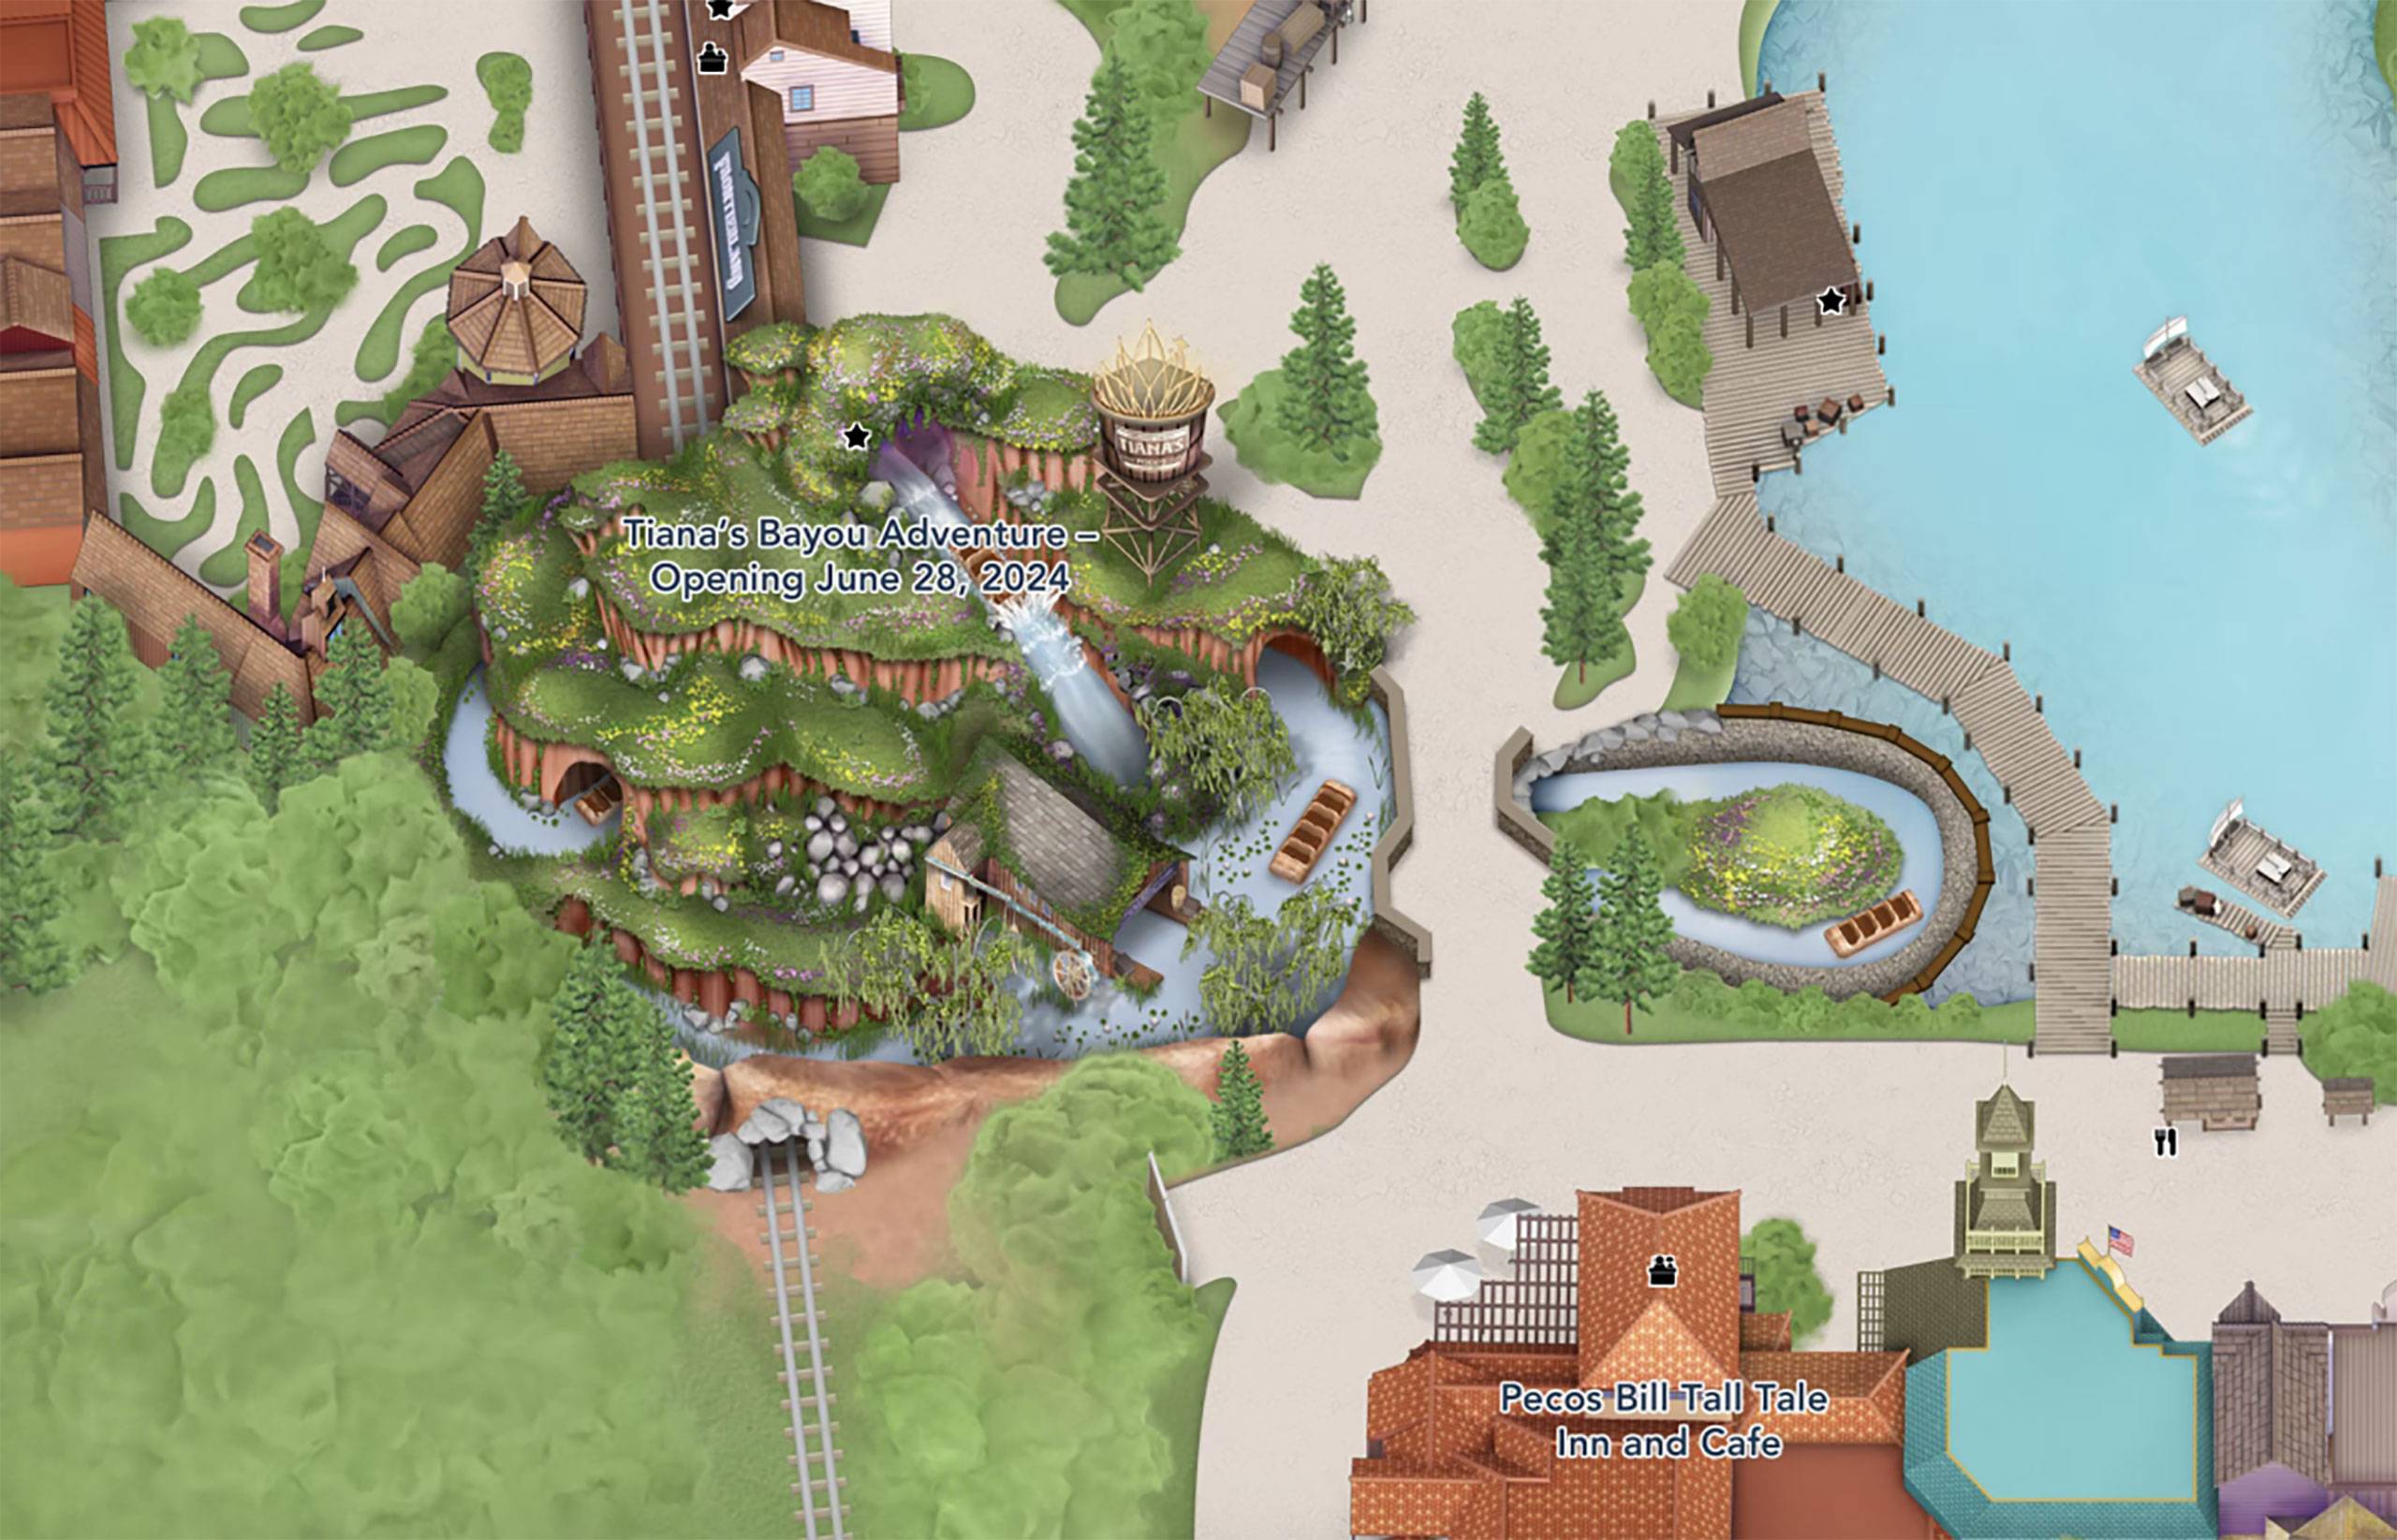 My Disney Experience Digital Map Updated With Tiana's Bayou Adventure